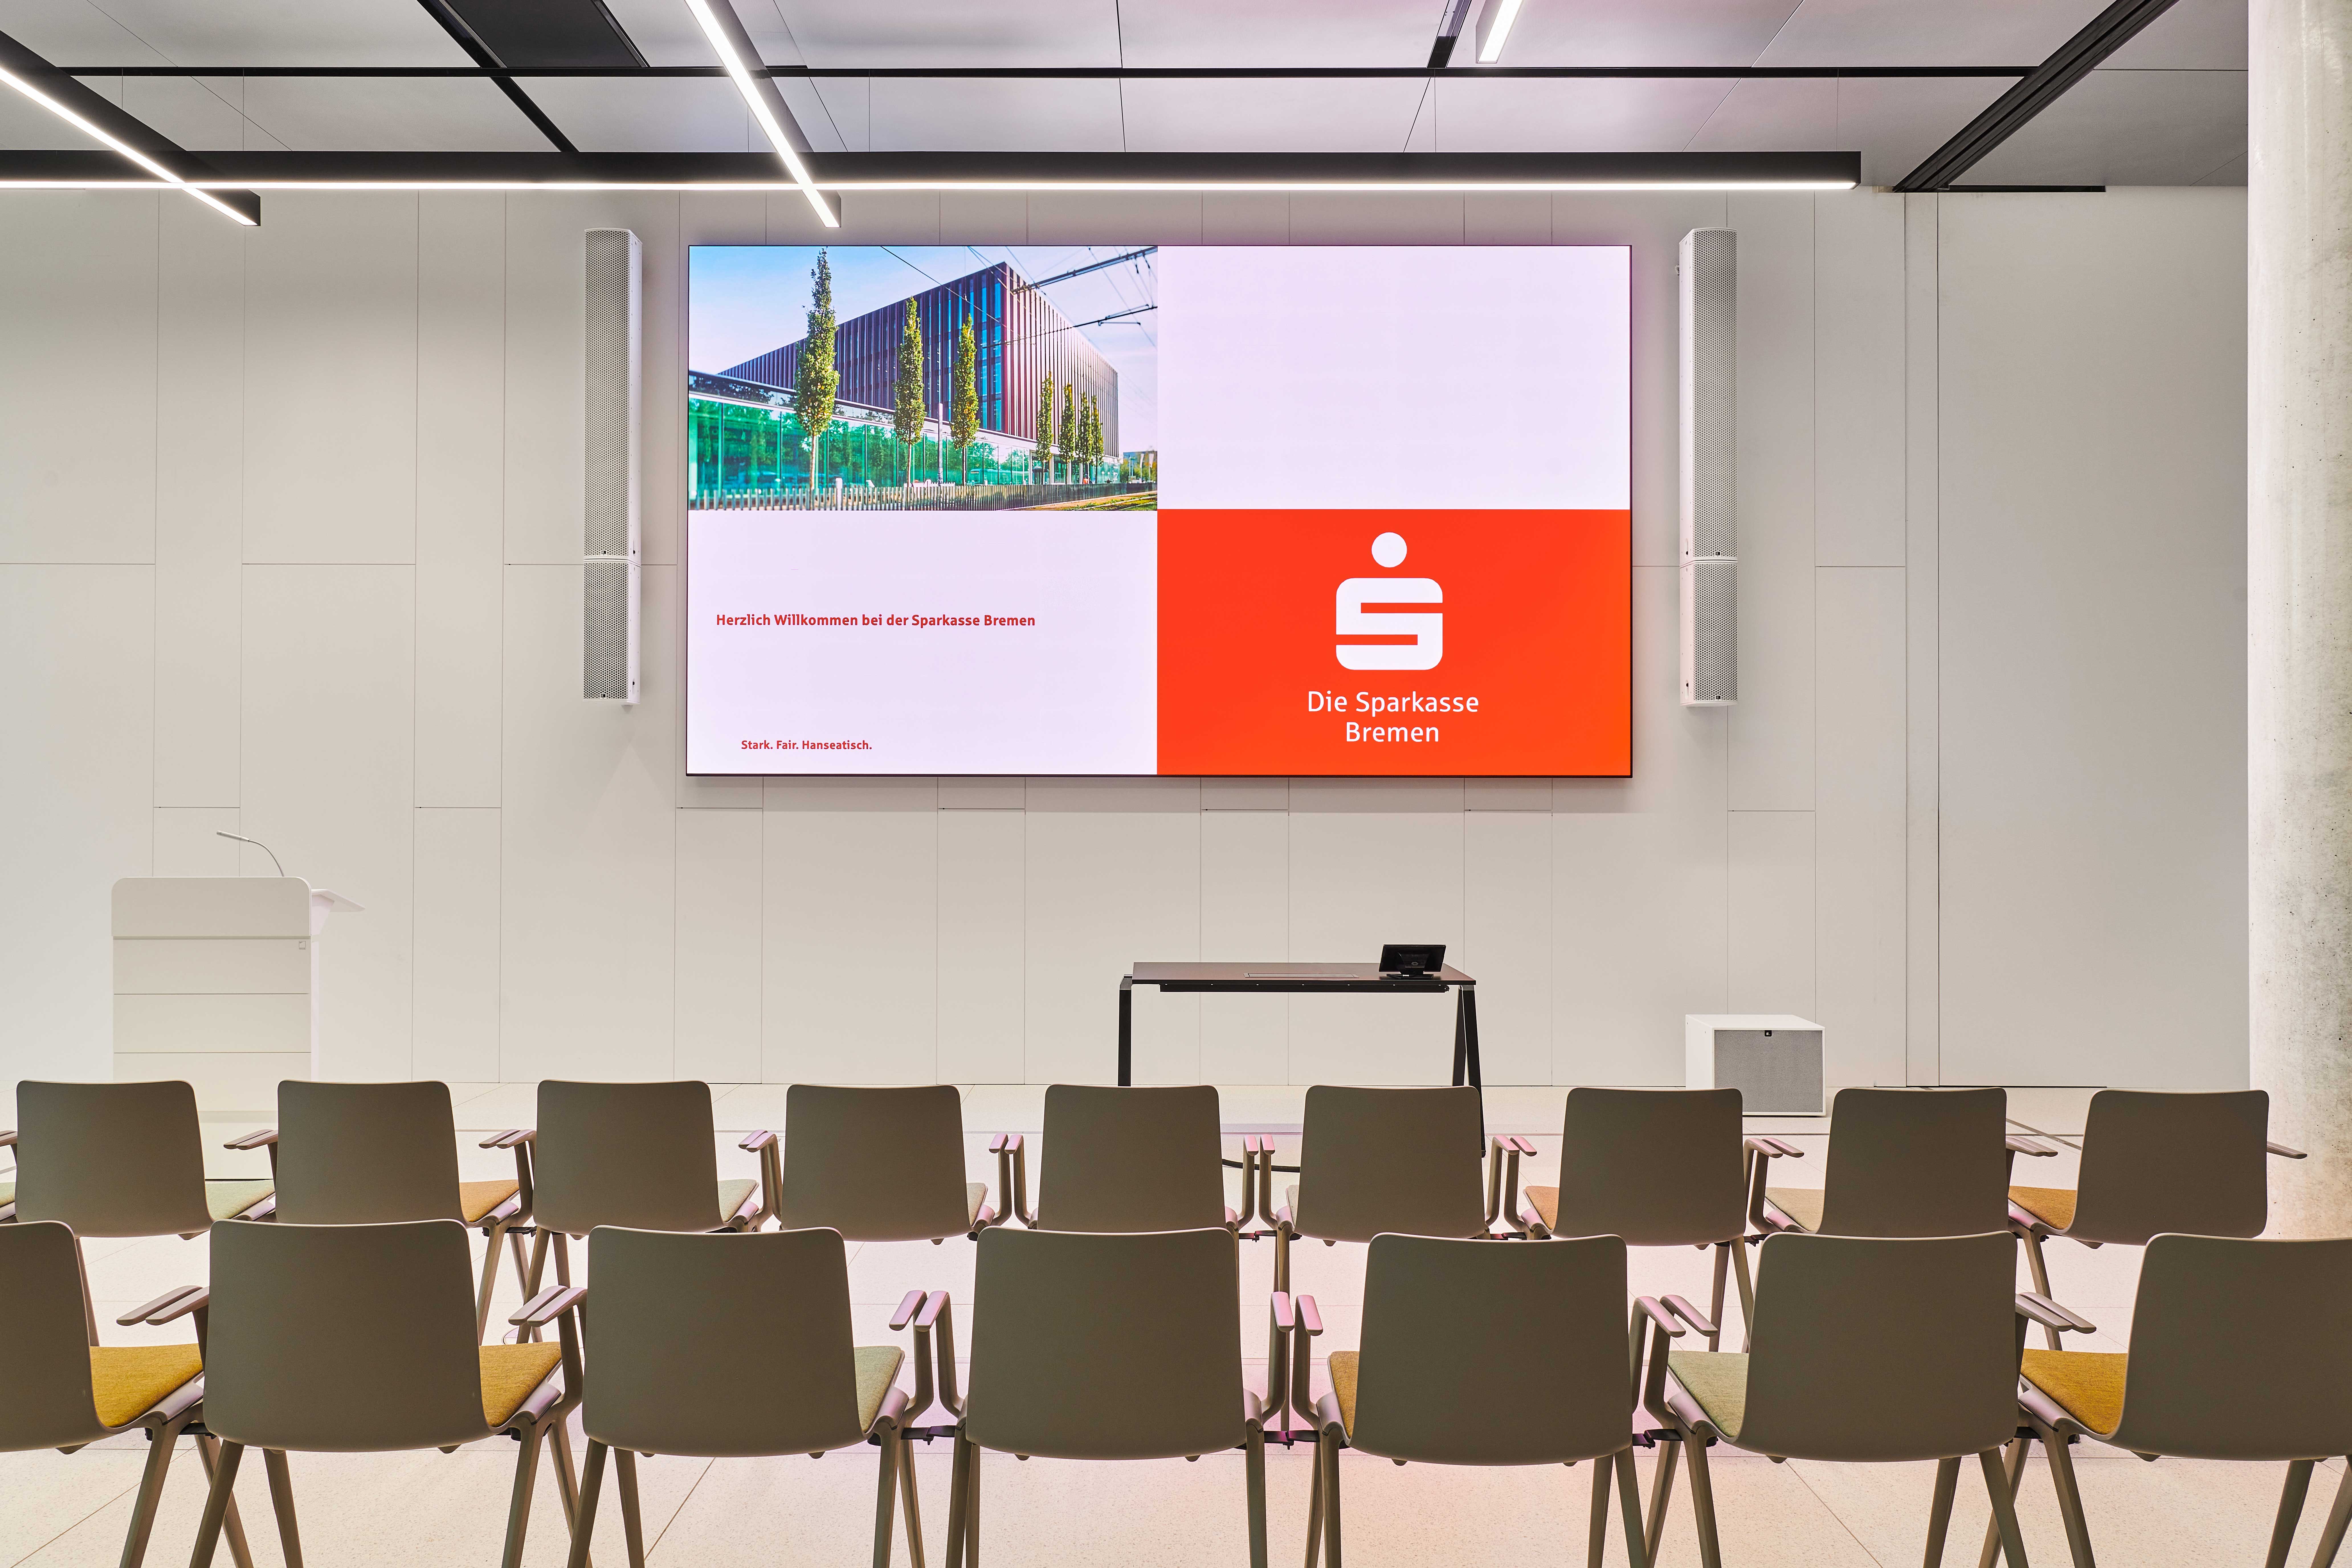 INFiLED installed two LED screens with a pixel pitch of 1.25mm for Sparkasse Bremen to help Sparkasse Bremen digitally upgrade.